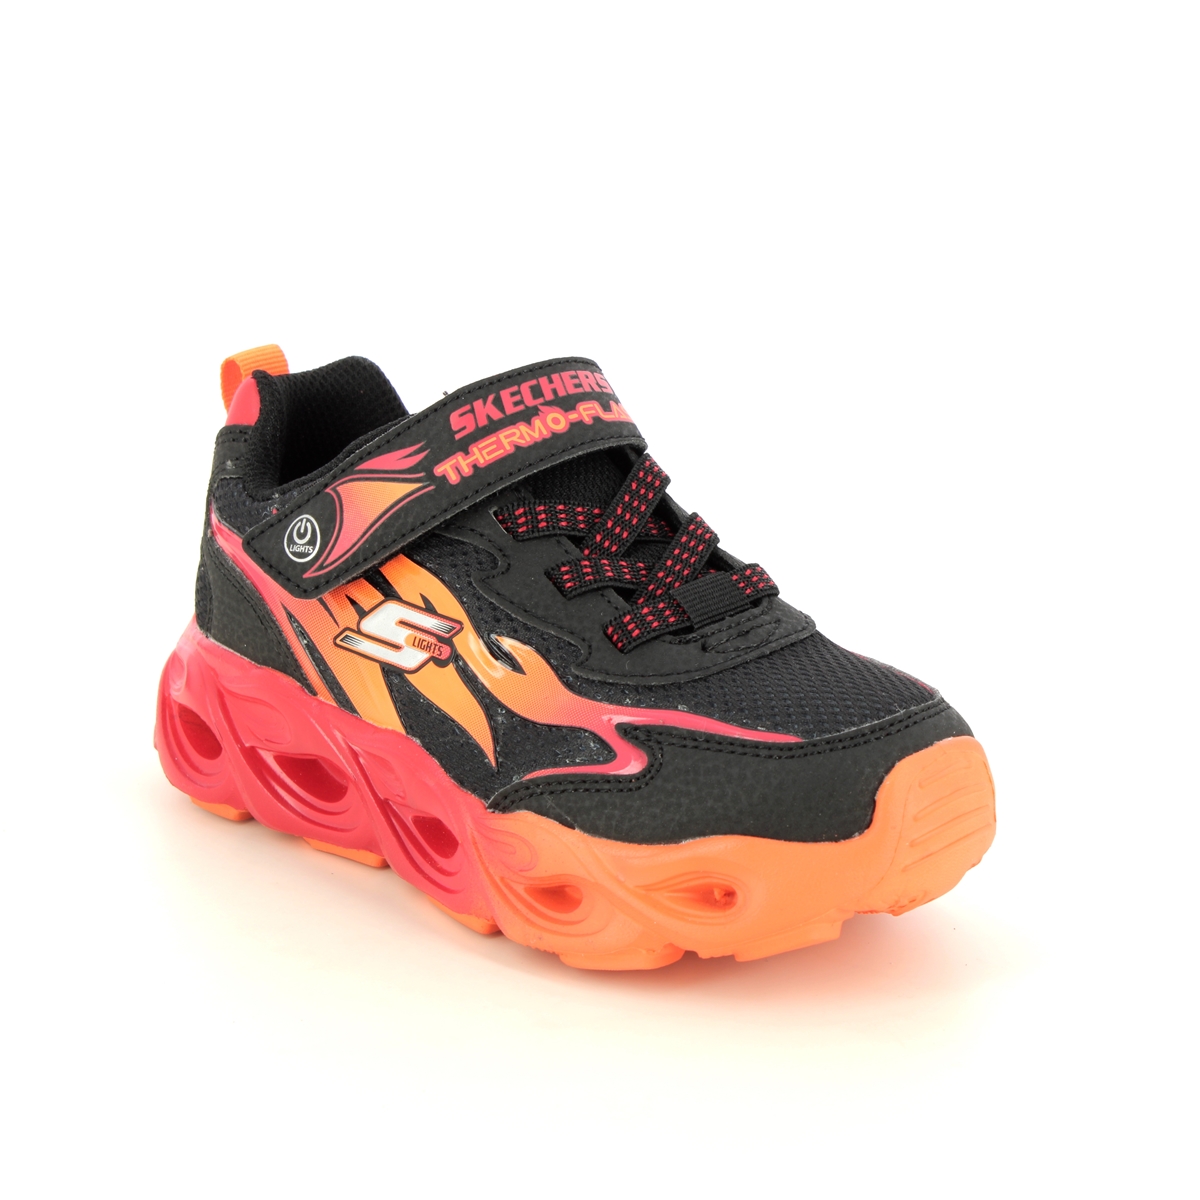 Skechers Thermo Flash Black Red Kids Trainers 400103L In Size 32 In Plain Black Red For kids